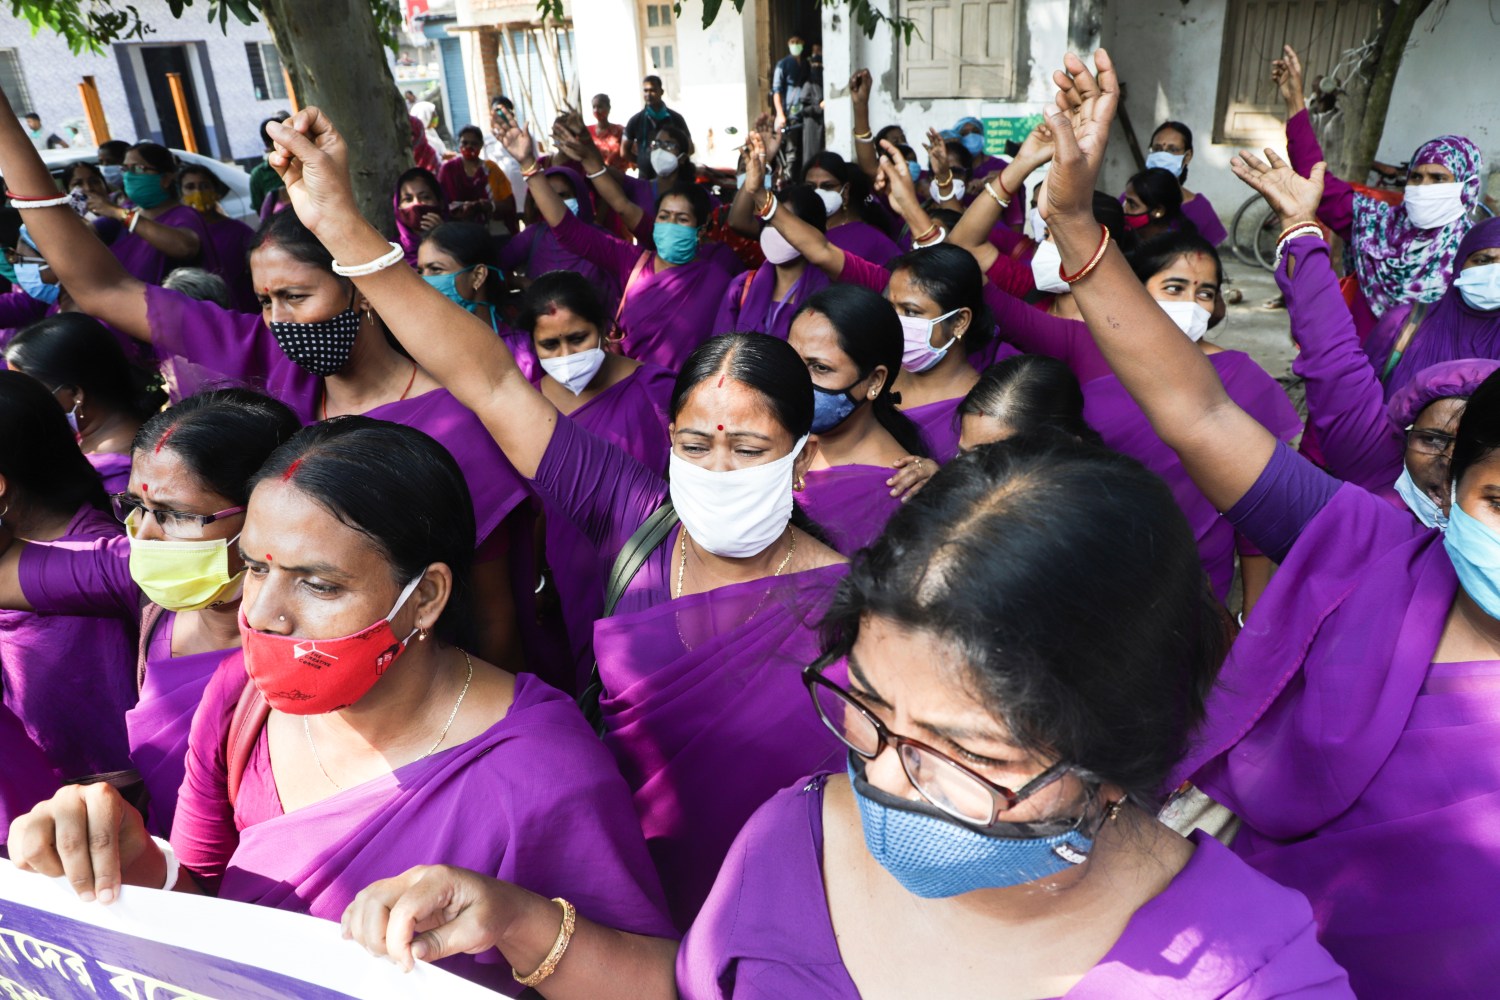 ASHA (Accredited Social Health Activist) workers seen wearing their uniforms, while chanting slogans during the protest against the West Bengal government over the non-payment of their salaries and other demands. (Photo by Jit Chattopadhyay / SOPA Images/Sipa USA)No Use Germany.